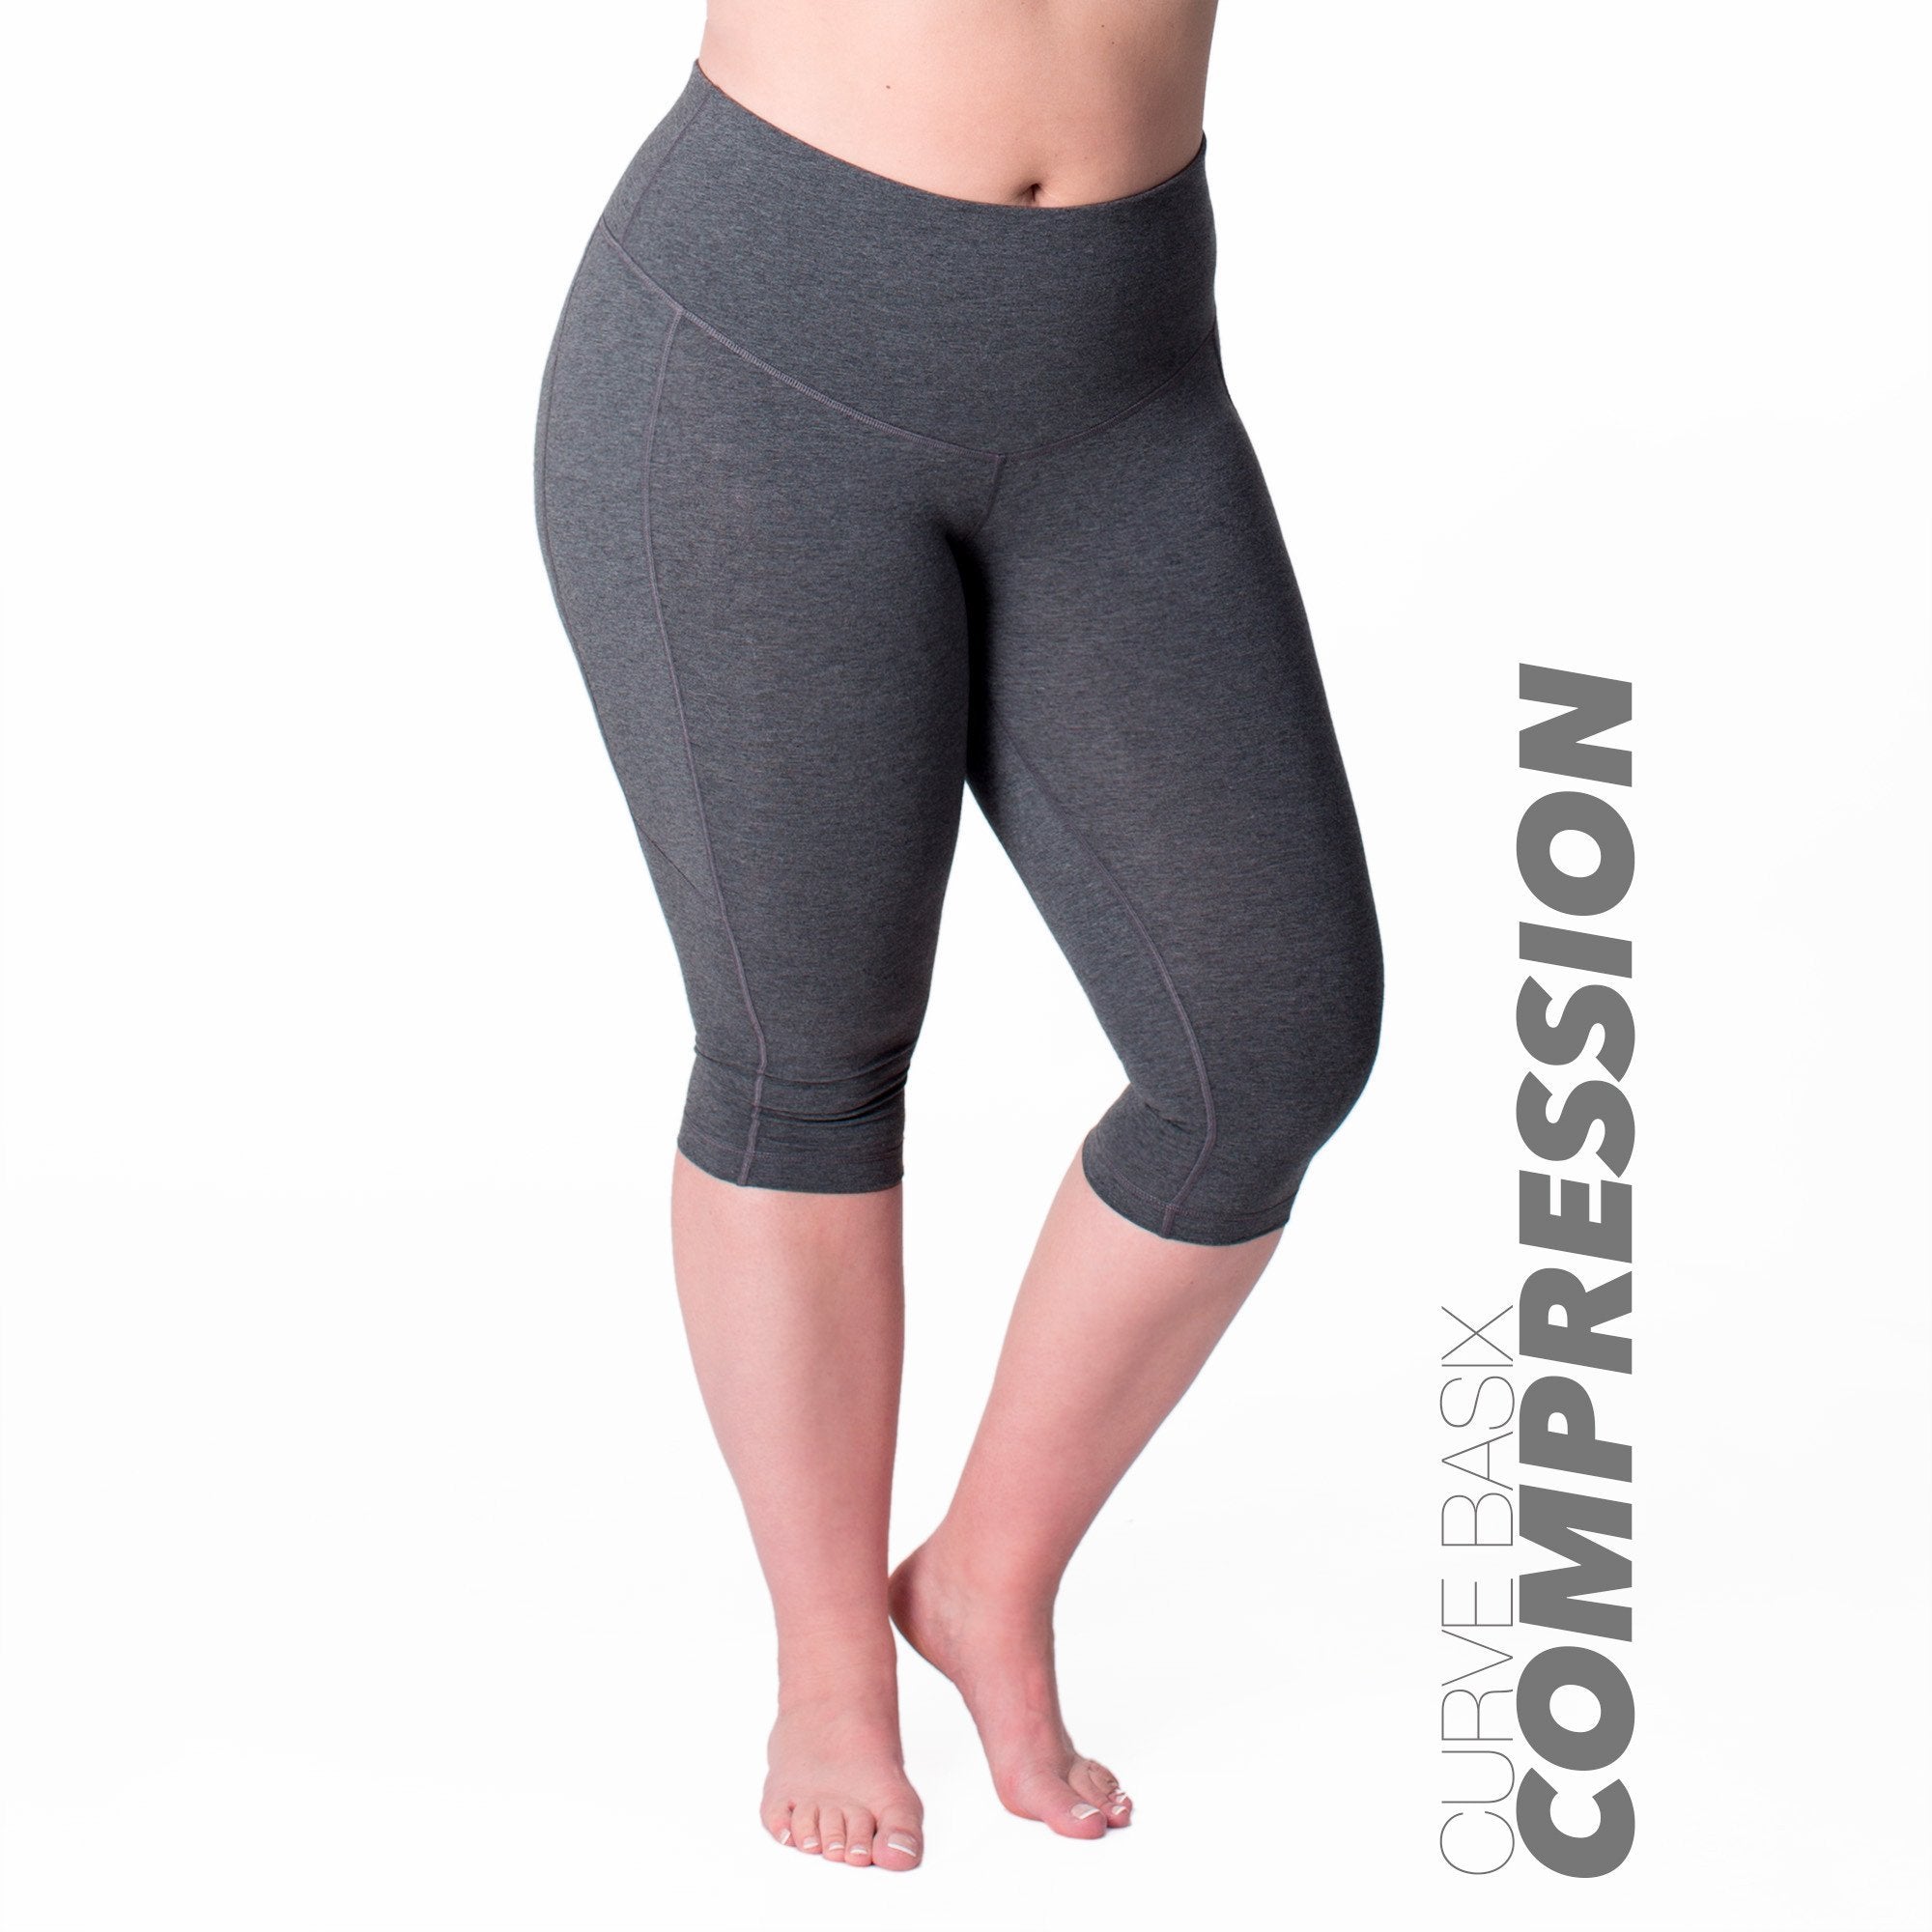 Women's Plus Size High Waisted Cotton Compression Leggings.  (7307982)